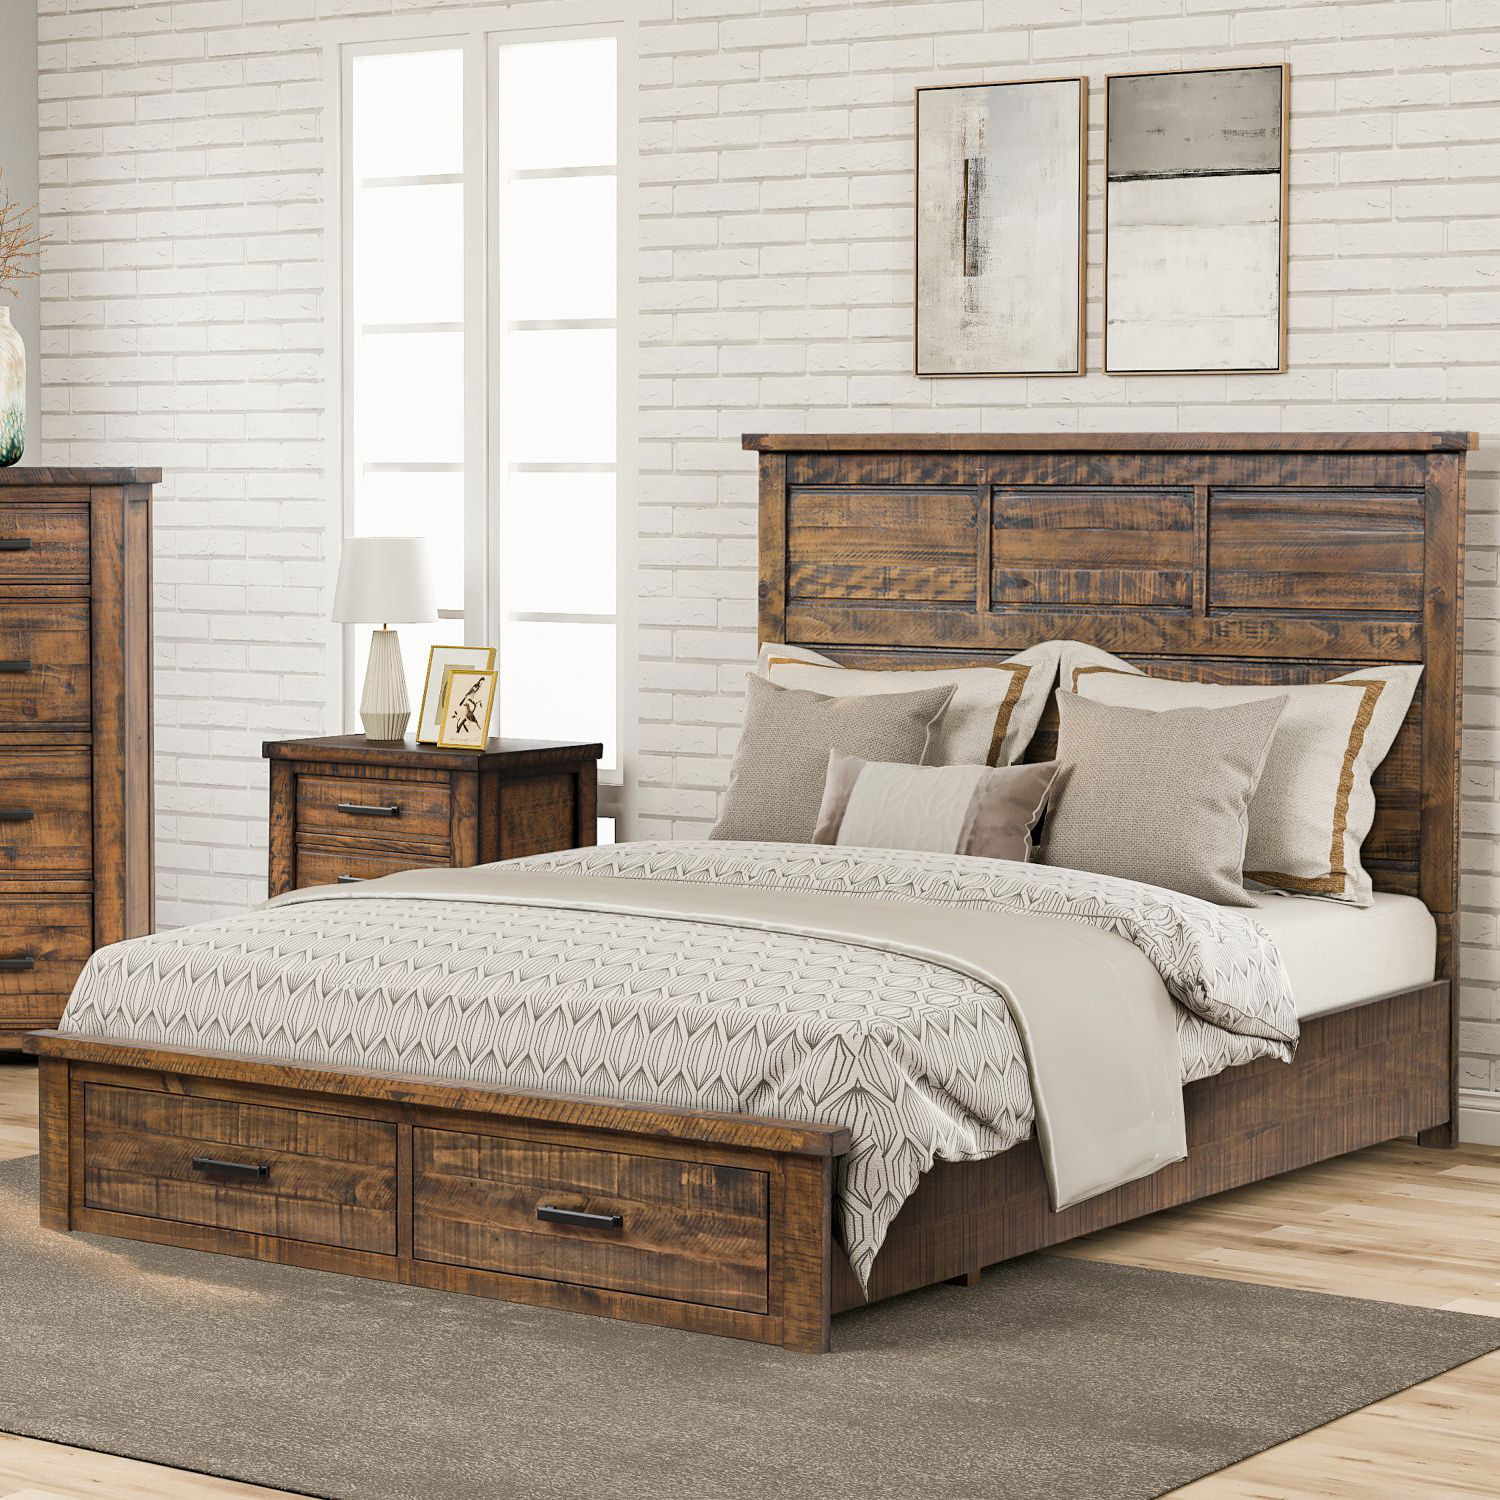 Rustic Reclaimed Pine Wood Queen Size, Pine Full Bed Frame